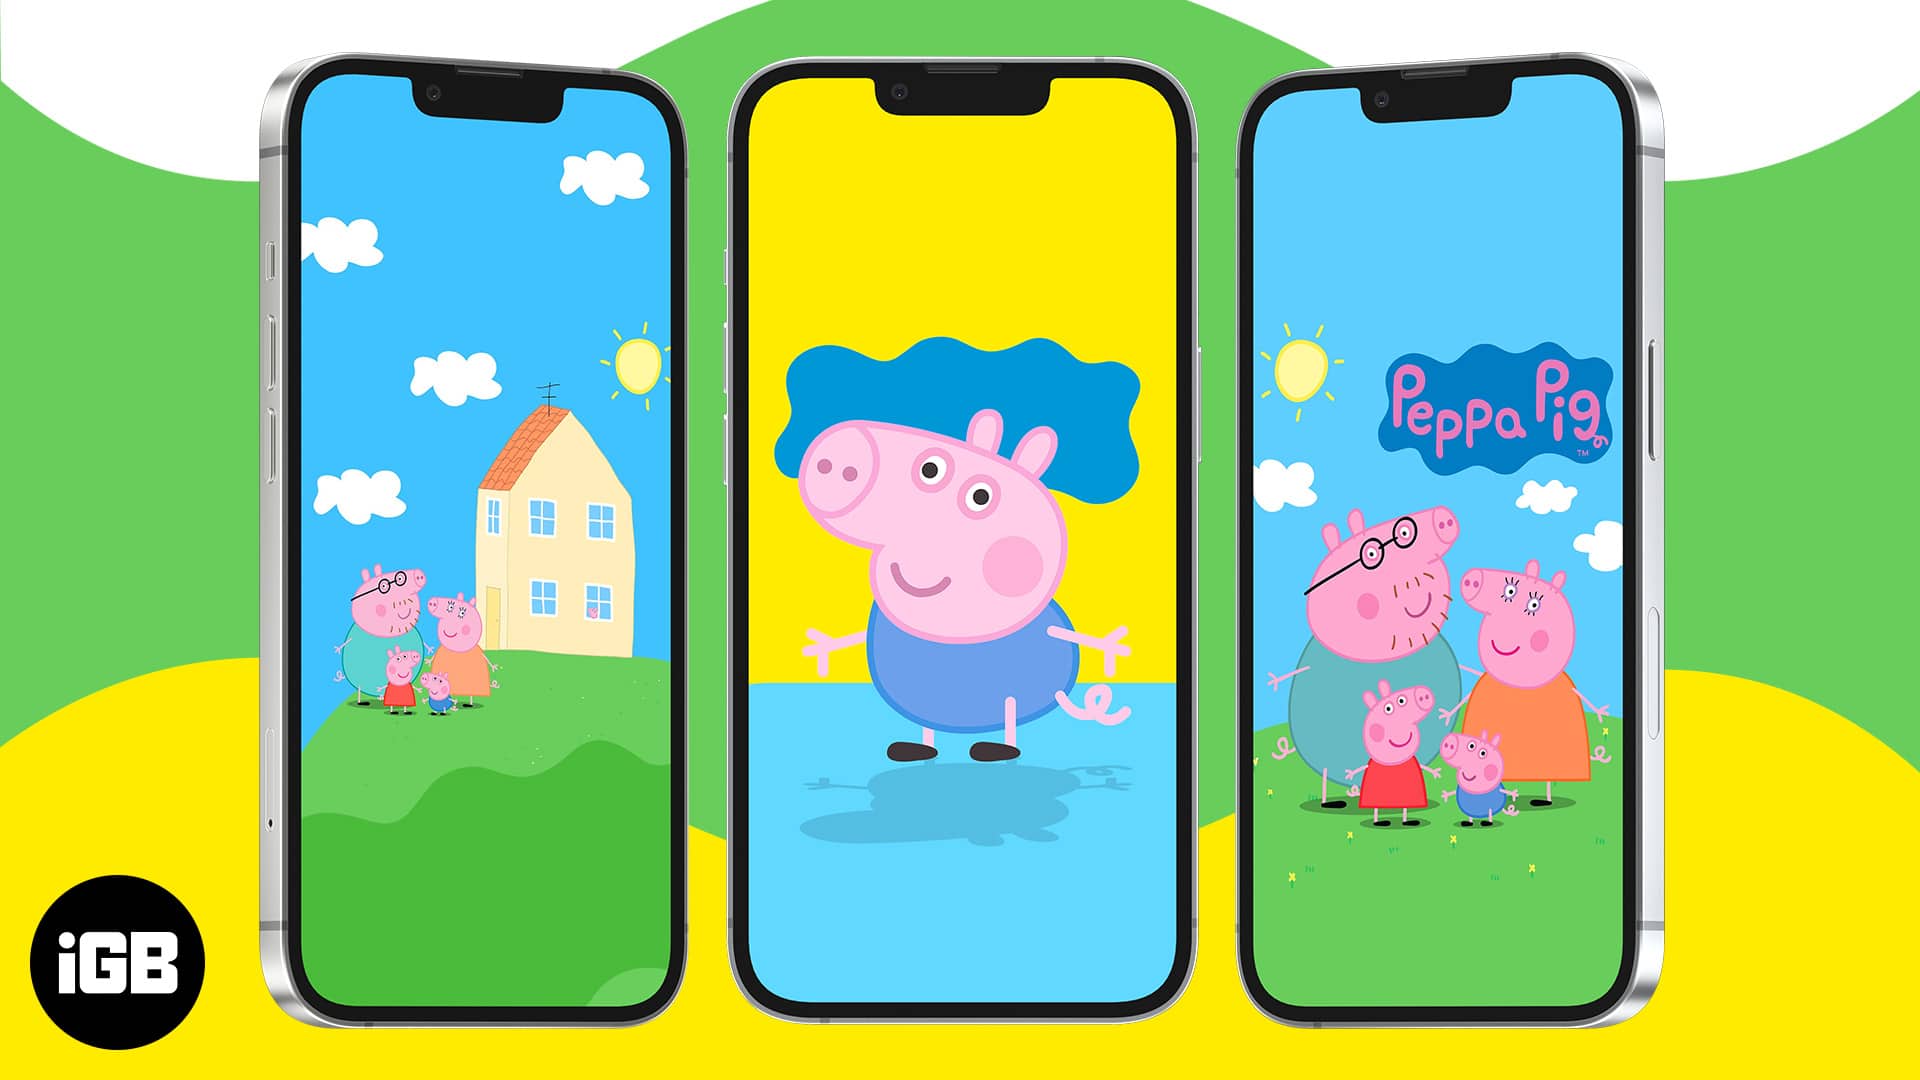 Peppa Pig Wallpapers and Backgrounds  WallpaperCG